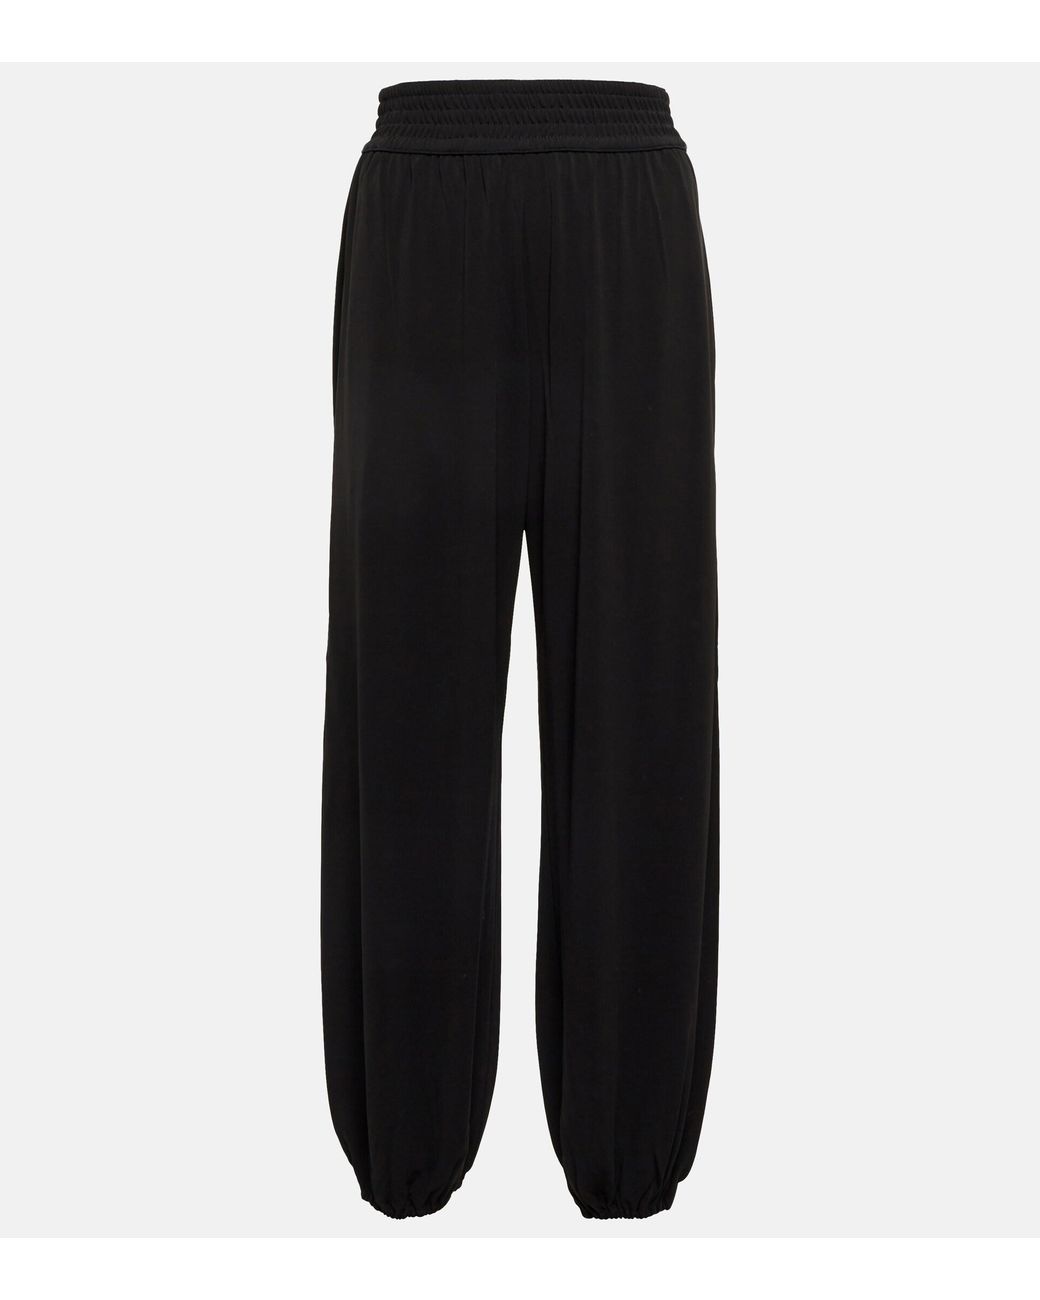 Tory Burch High-rise Jersey Pants in Black | Lyst